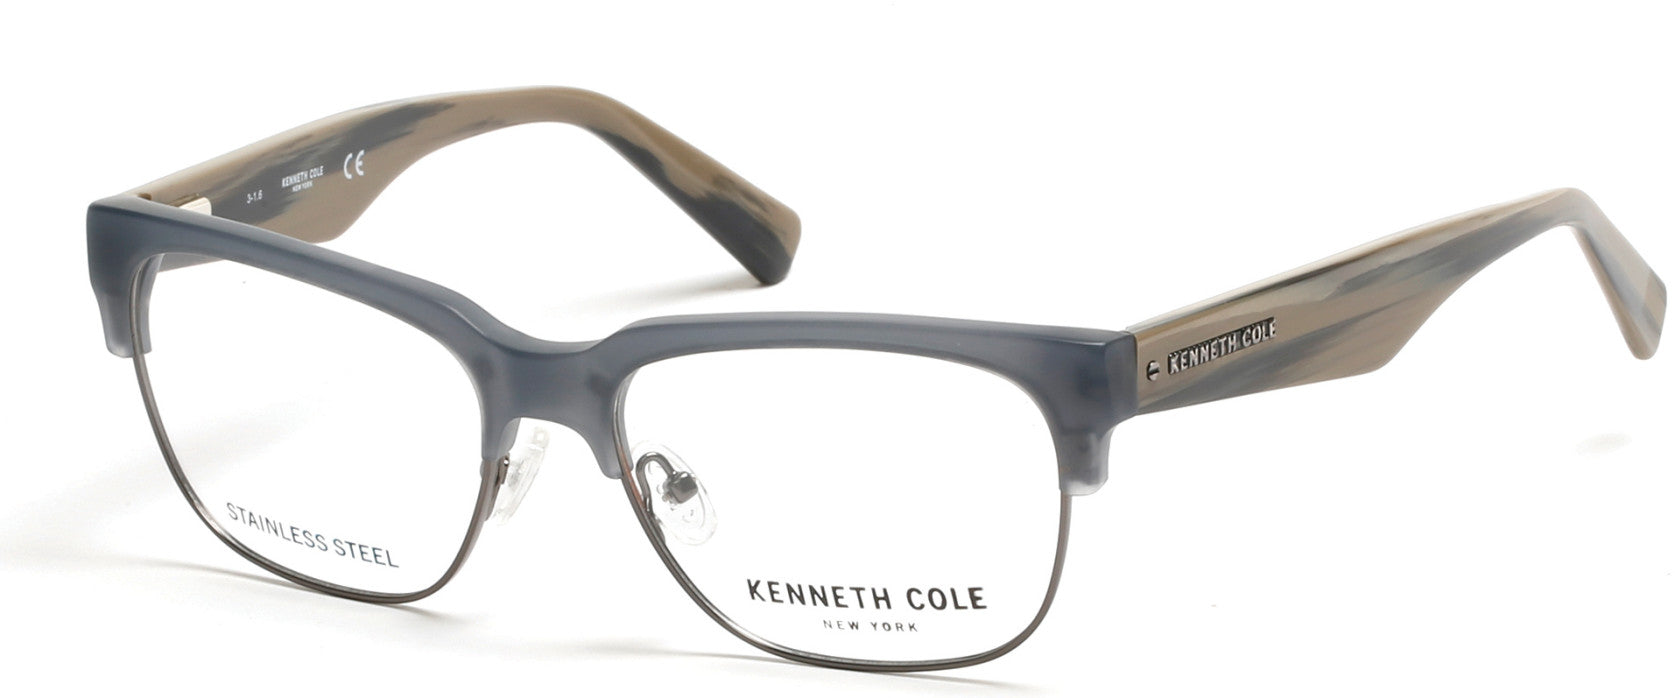 Kenneth Cole New York,Kenneth Cole Reaction KC0257 Eyeglasses 020-020 - Grey/other